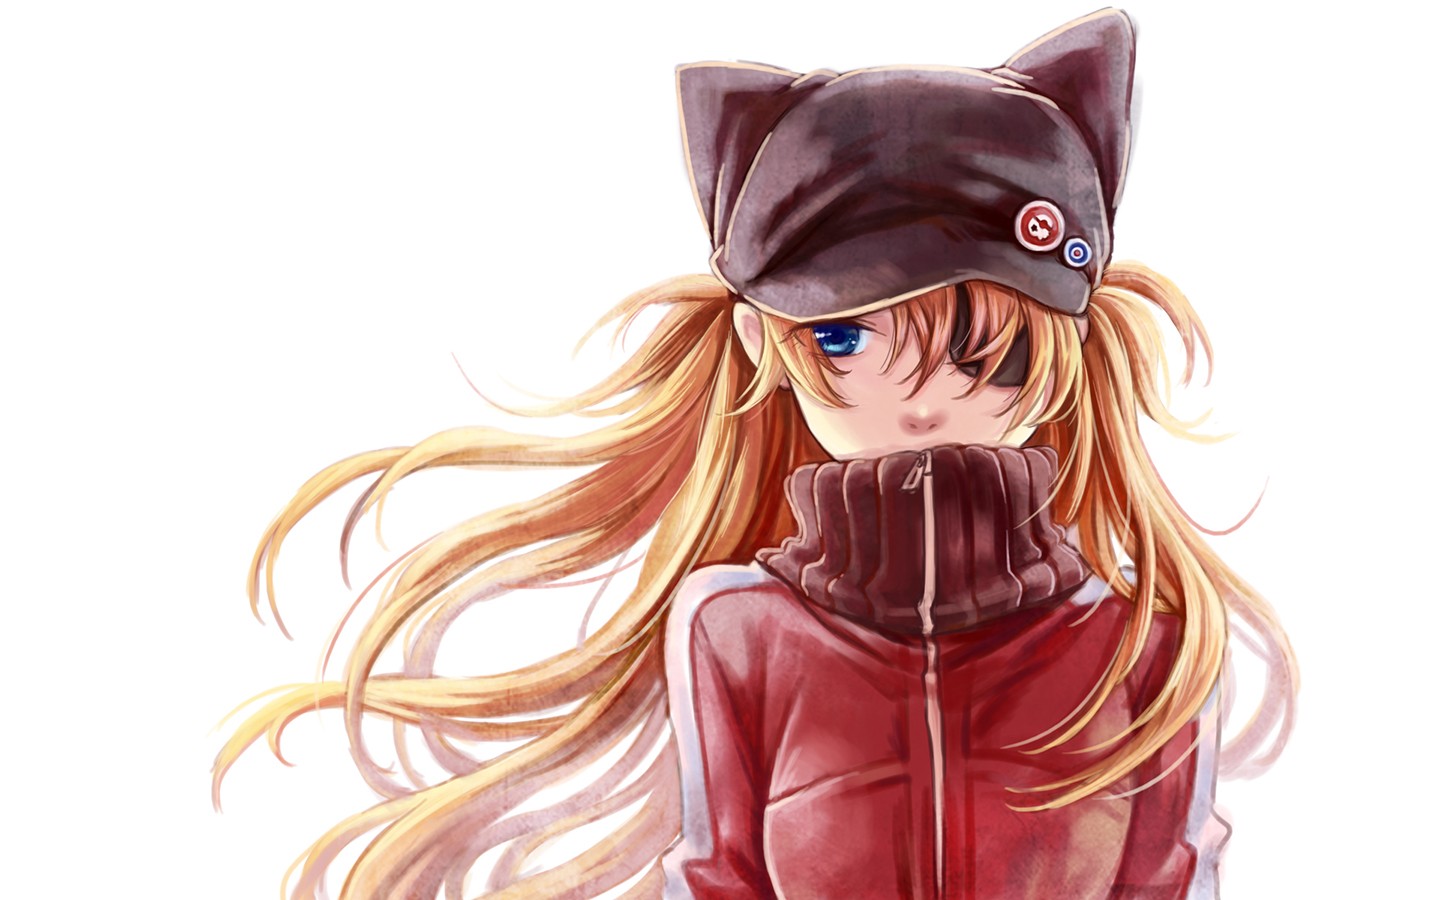 Anime 1440x900 anime girls anime Asuka Langley Soryu Neon Genesis Evangelion eyepatches blue hair long hair simple background hat women with hats white background